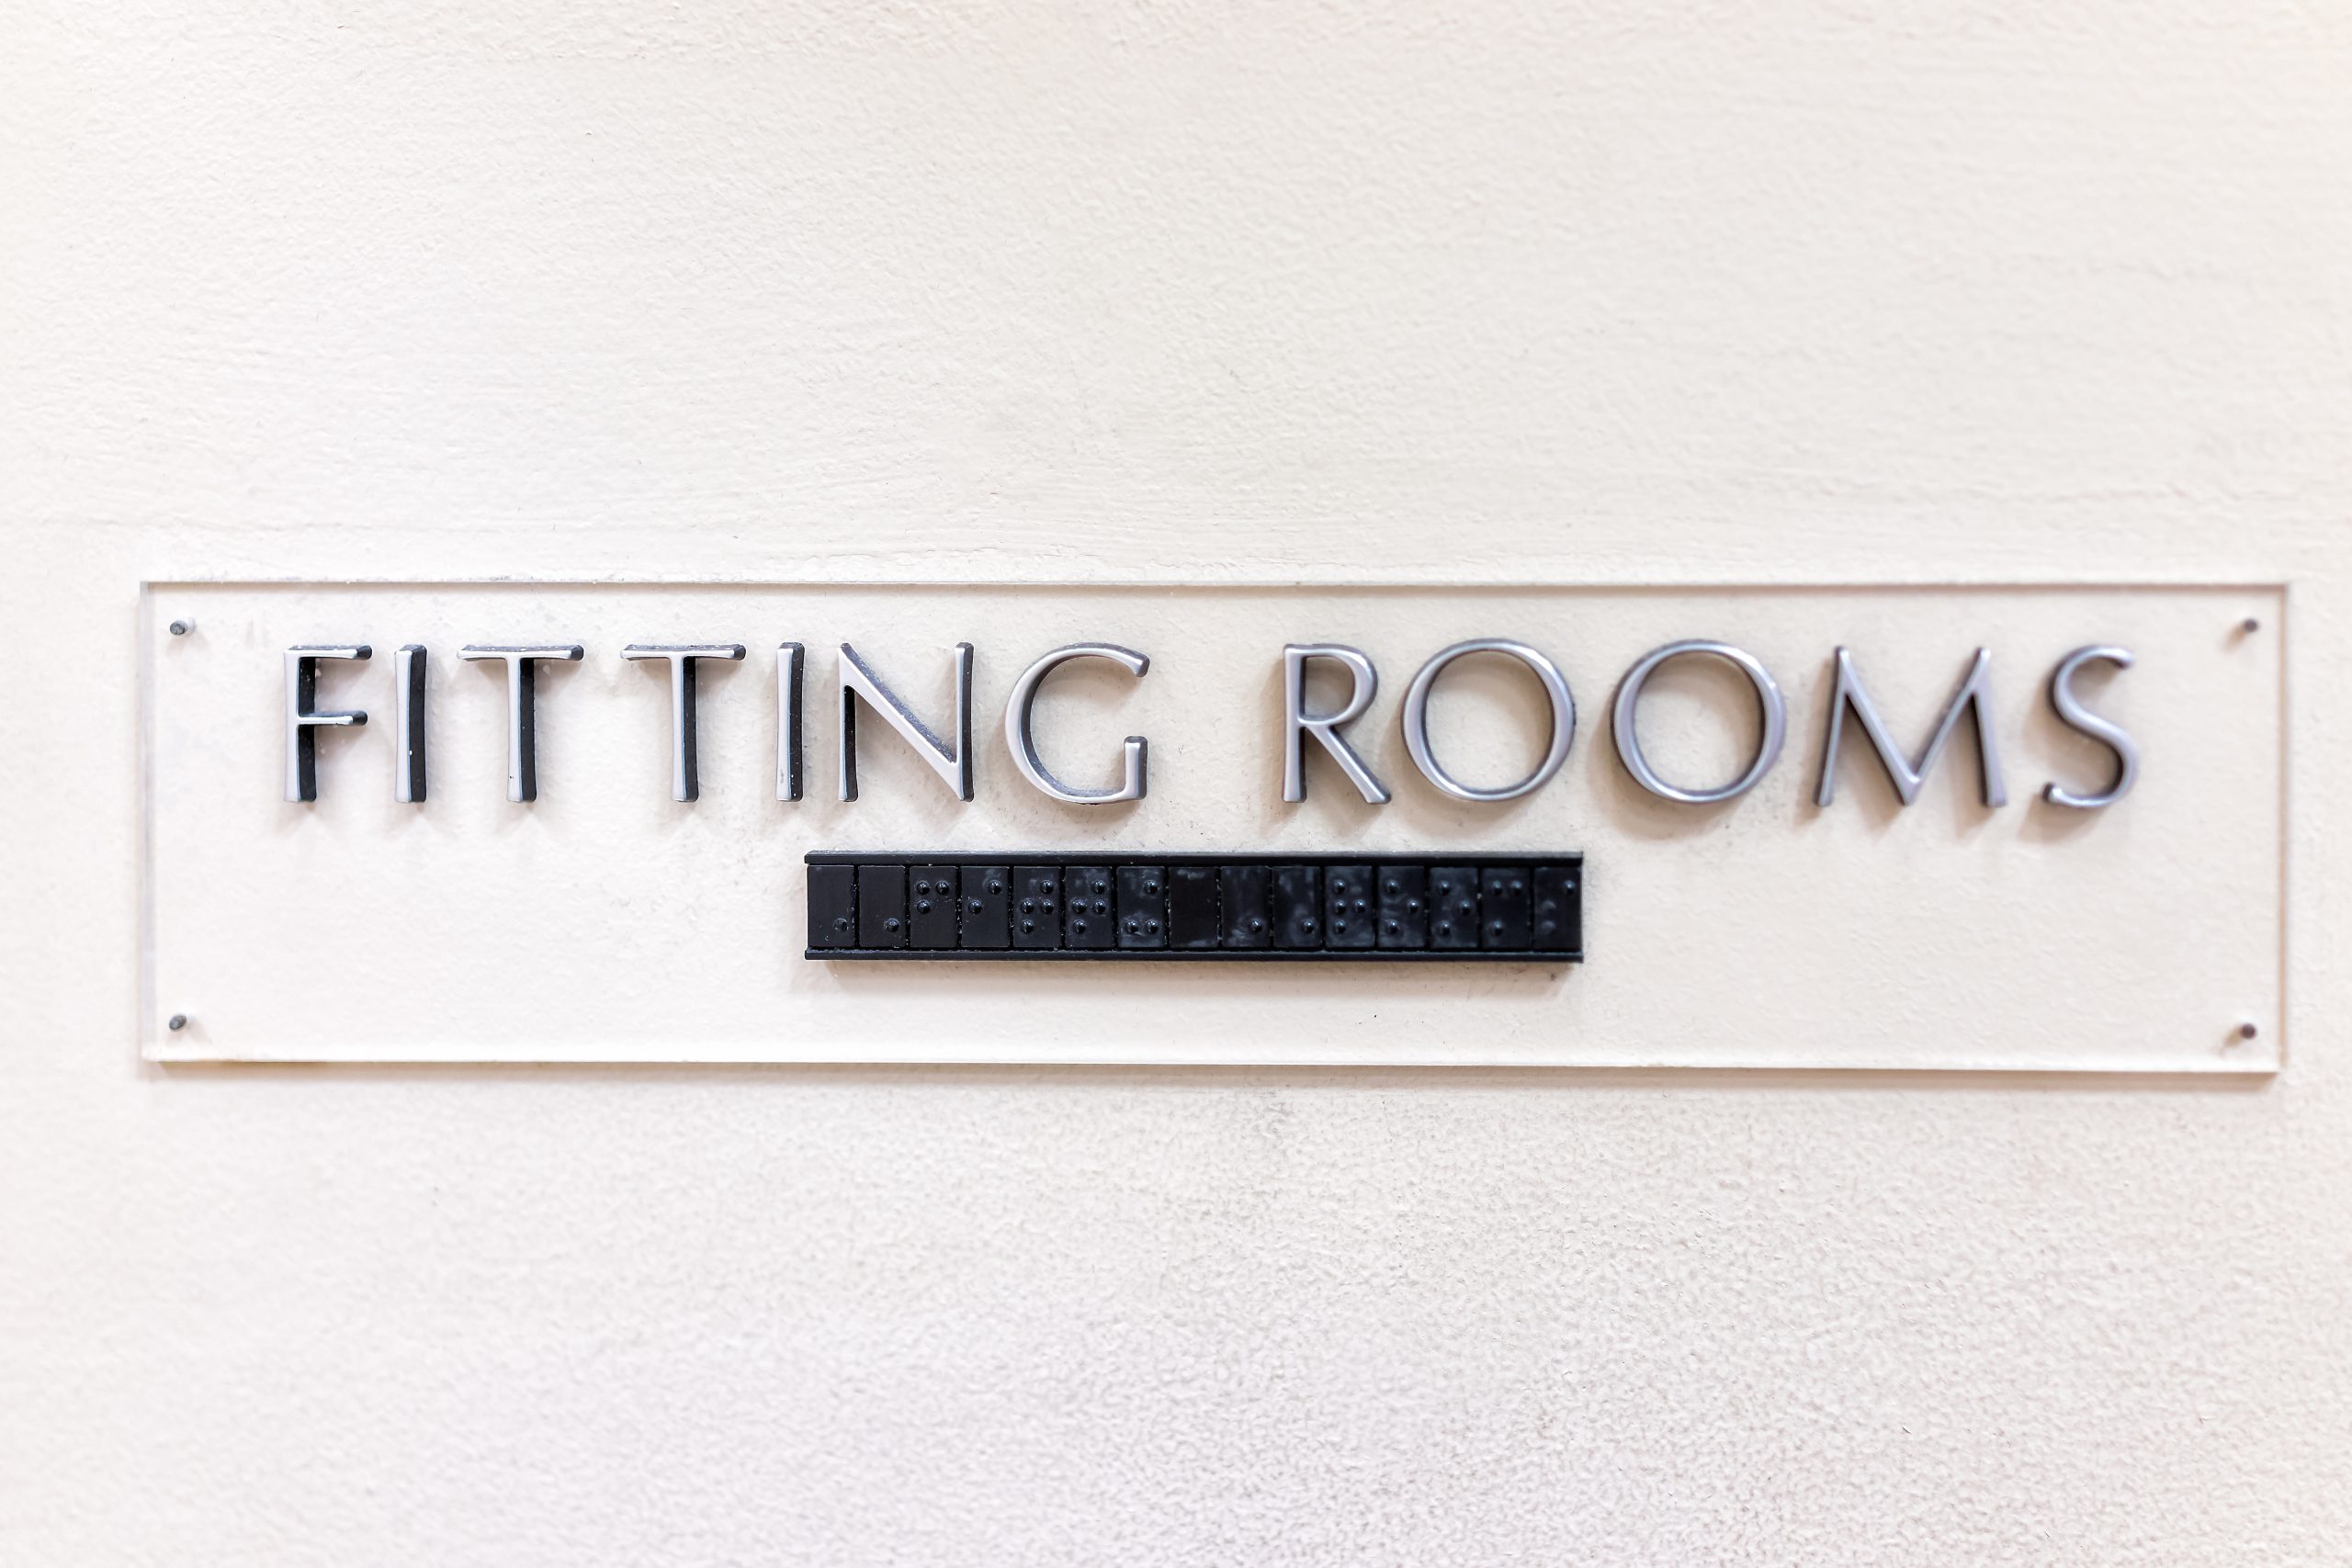 Acrylic Dimensional Letters Sign for Fitting Rooms